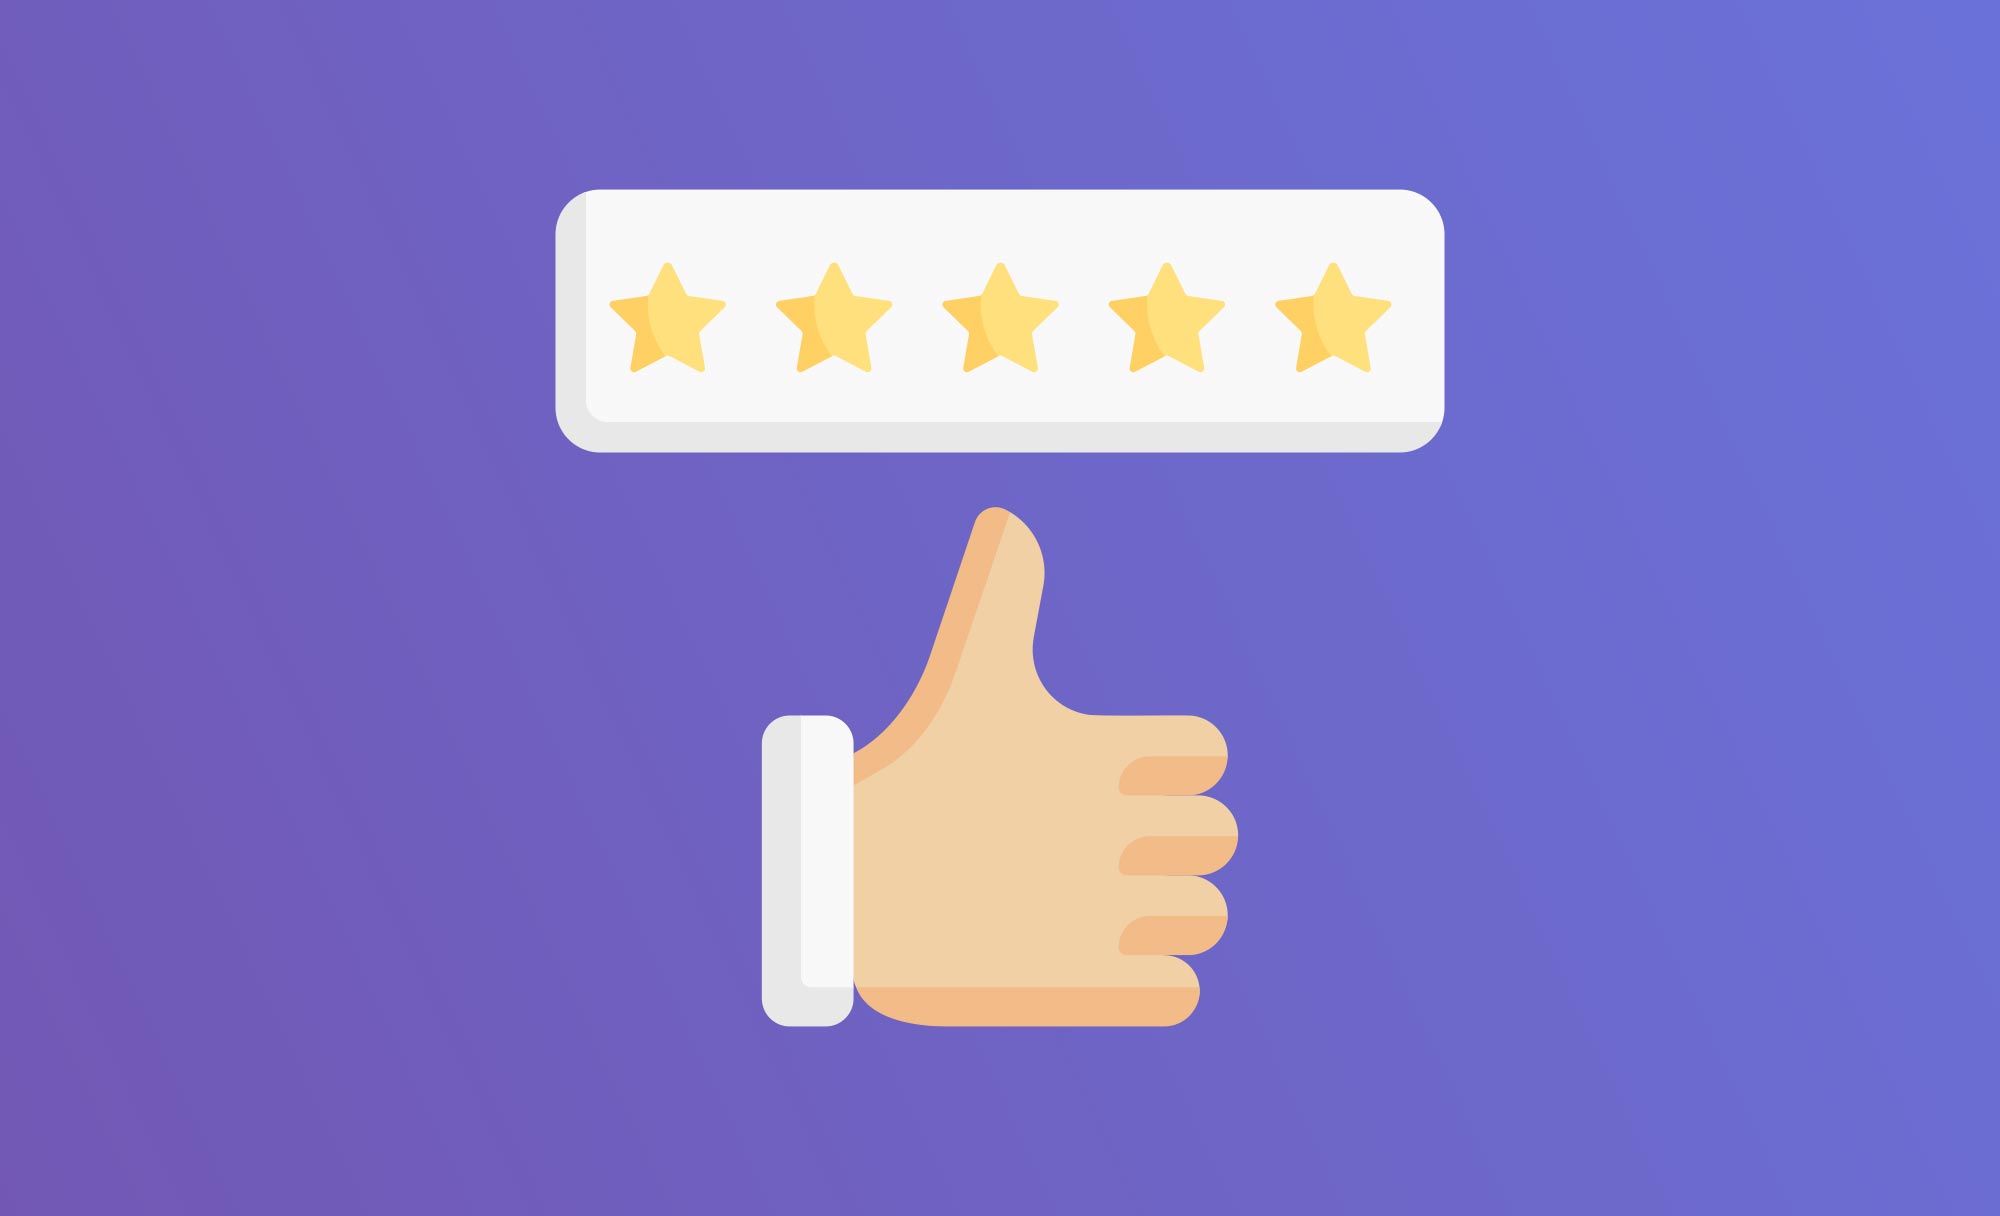 5 star Google review requests: what's the best strategy?